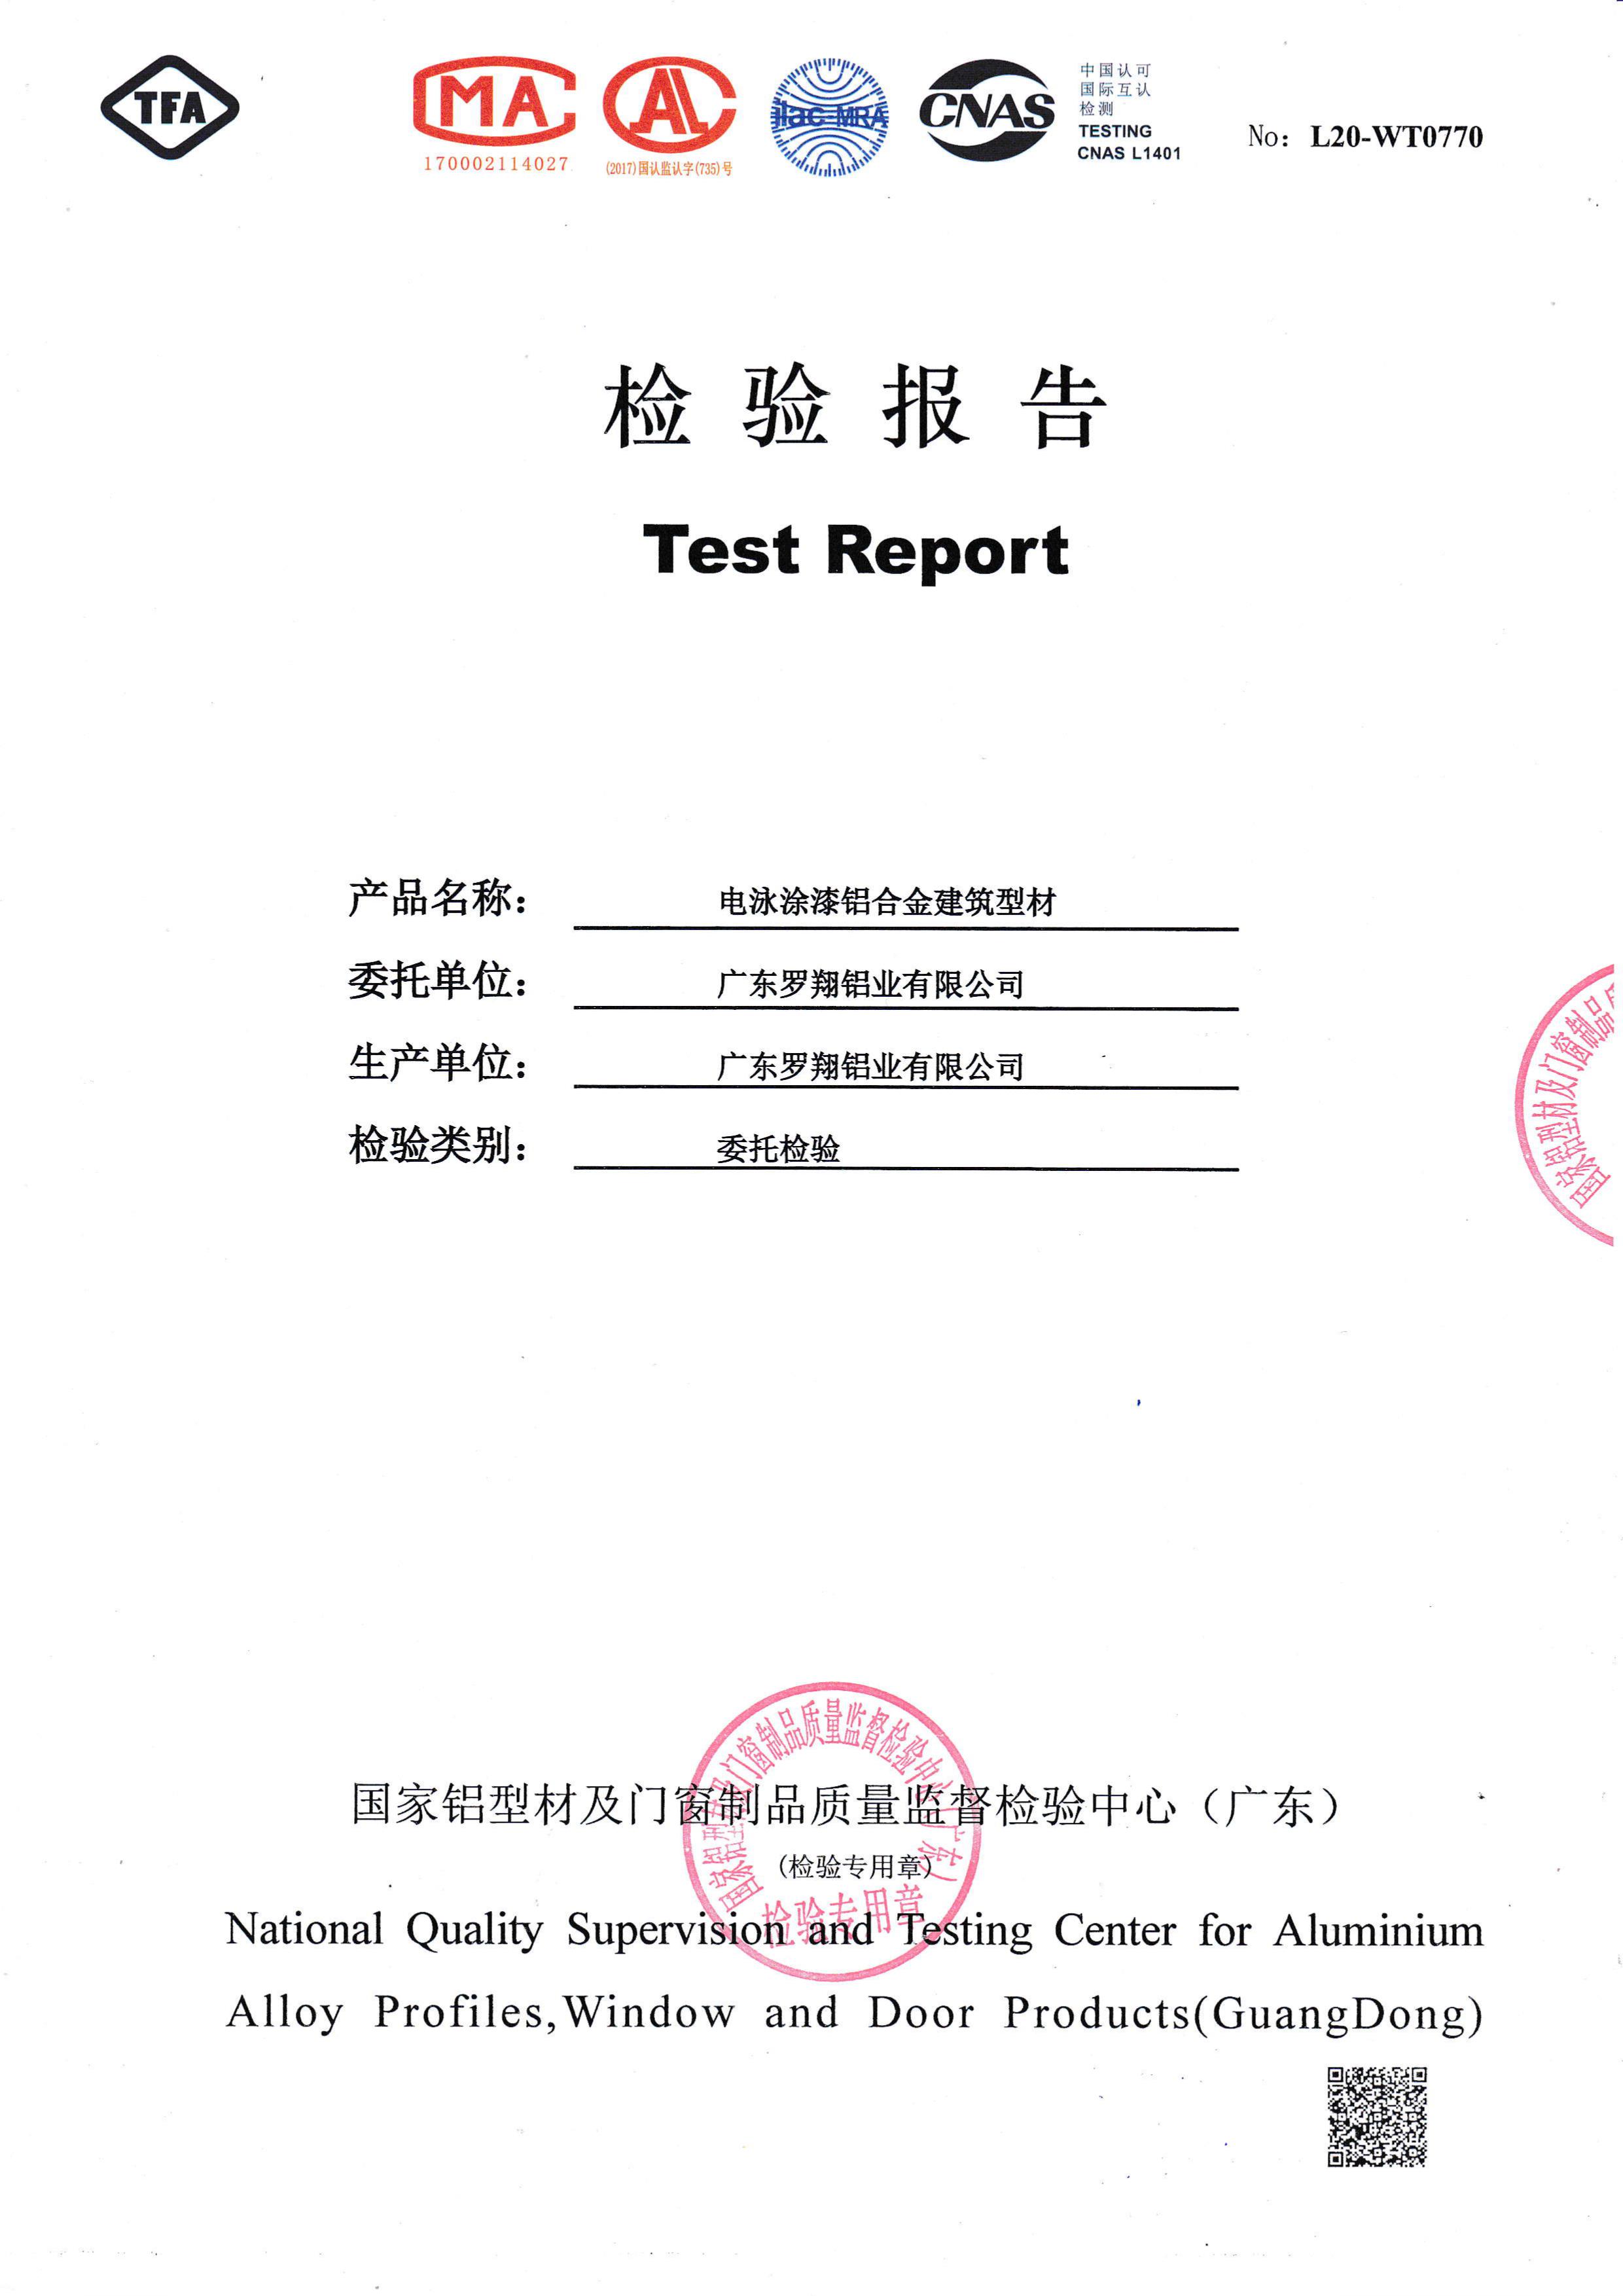 Electrophoretic painting inspection report (1)